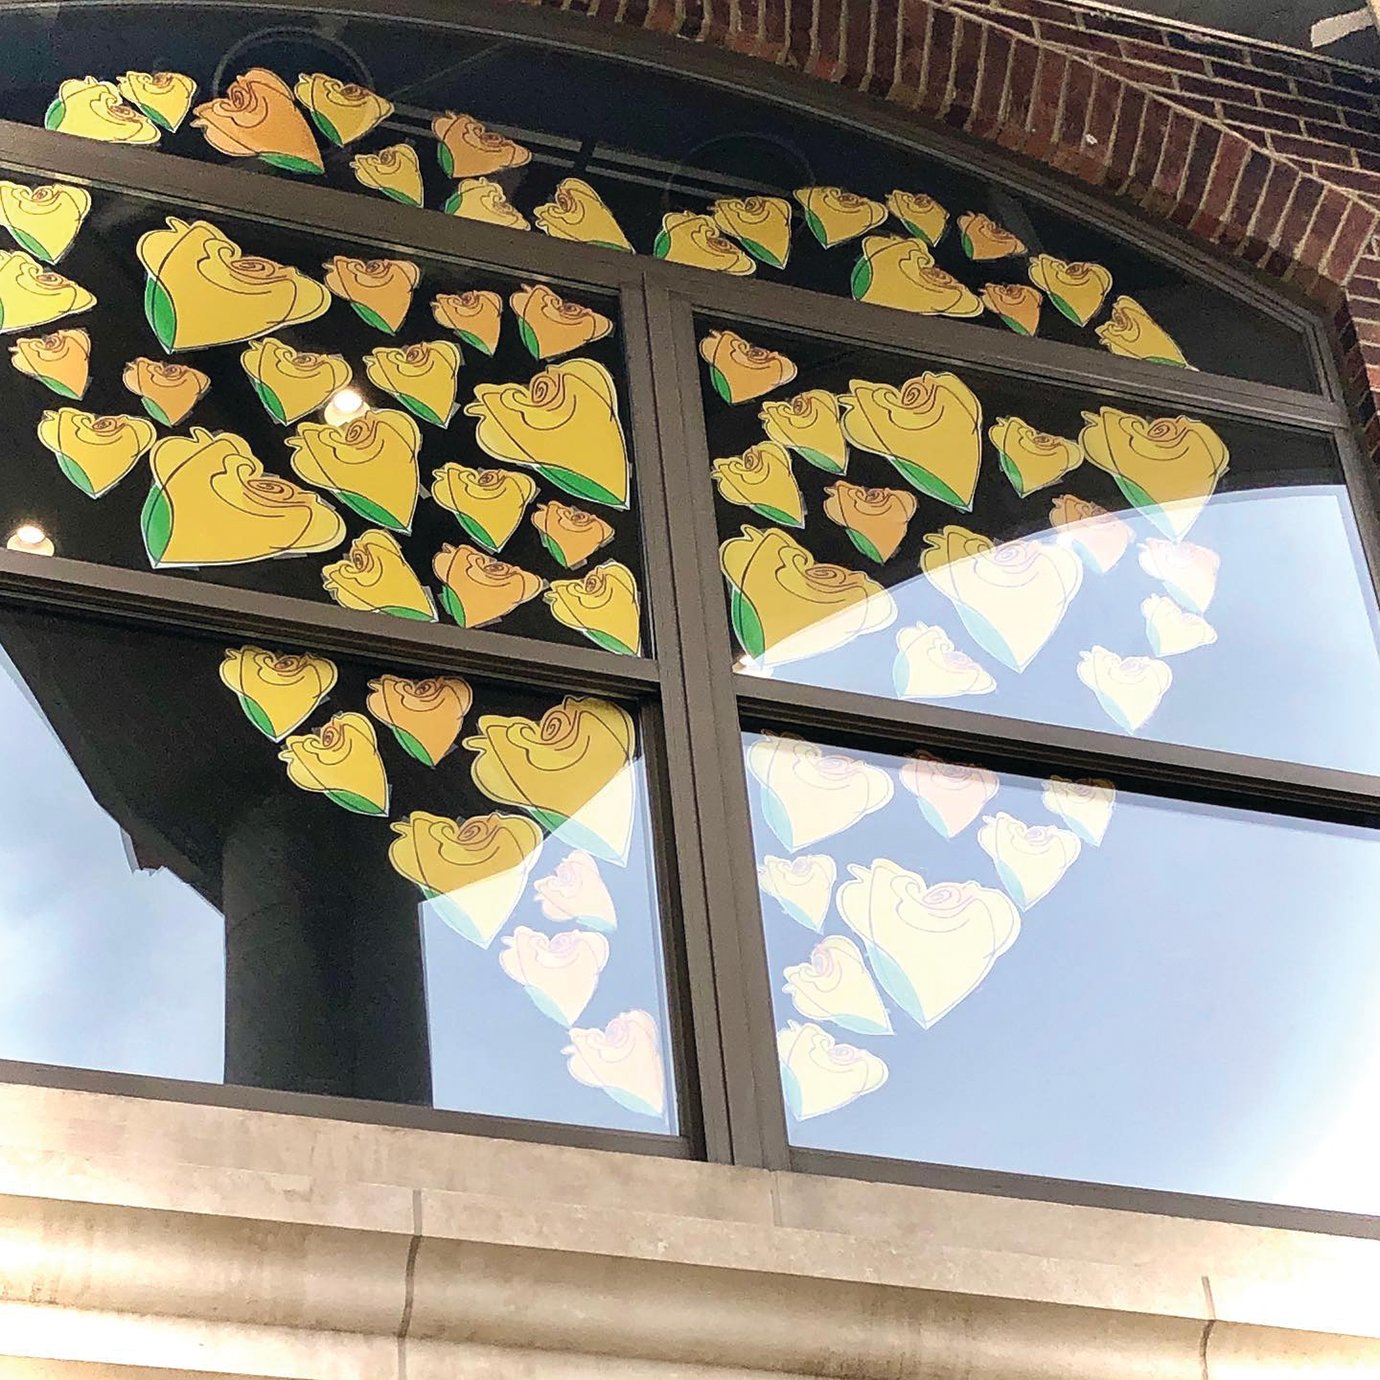 A show of support for local businesses is displayed in the second-floor window of the Fusion 54 building in downtown Crawfordsville.